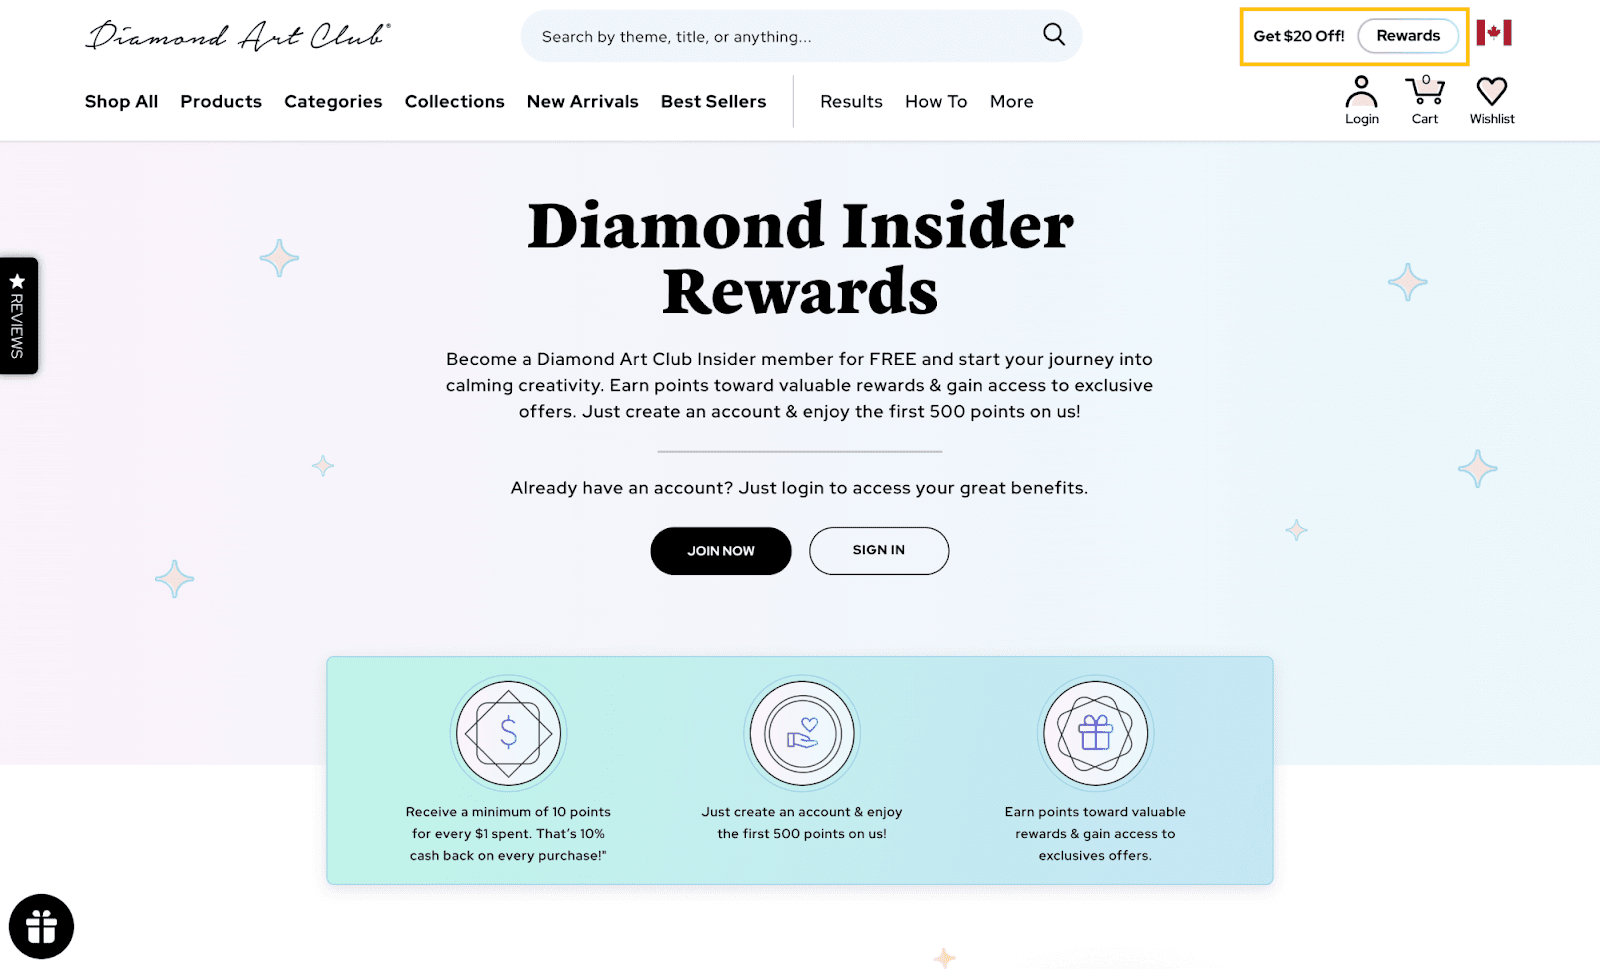 A screenshot of Diamond Art Club’s loyalty program explainer page showing its call-to-action to join the program.